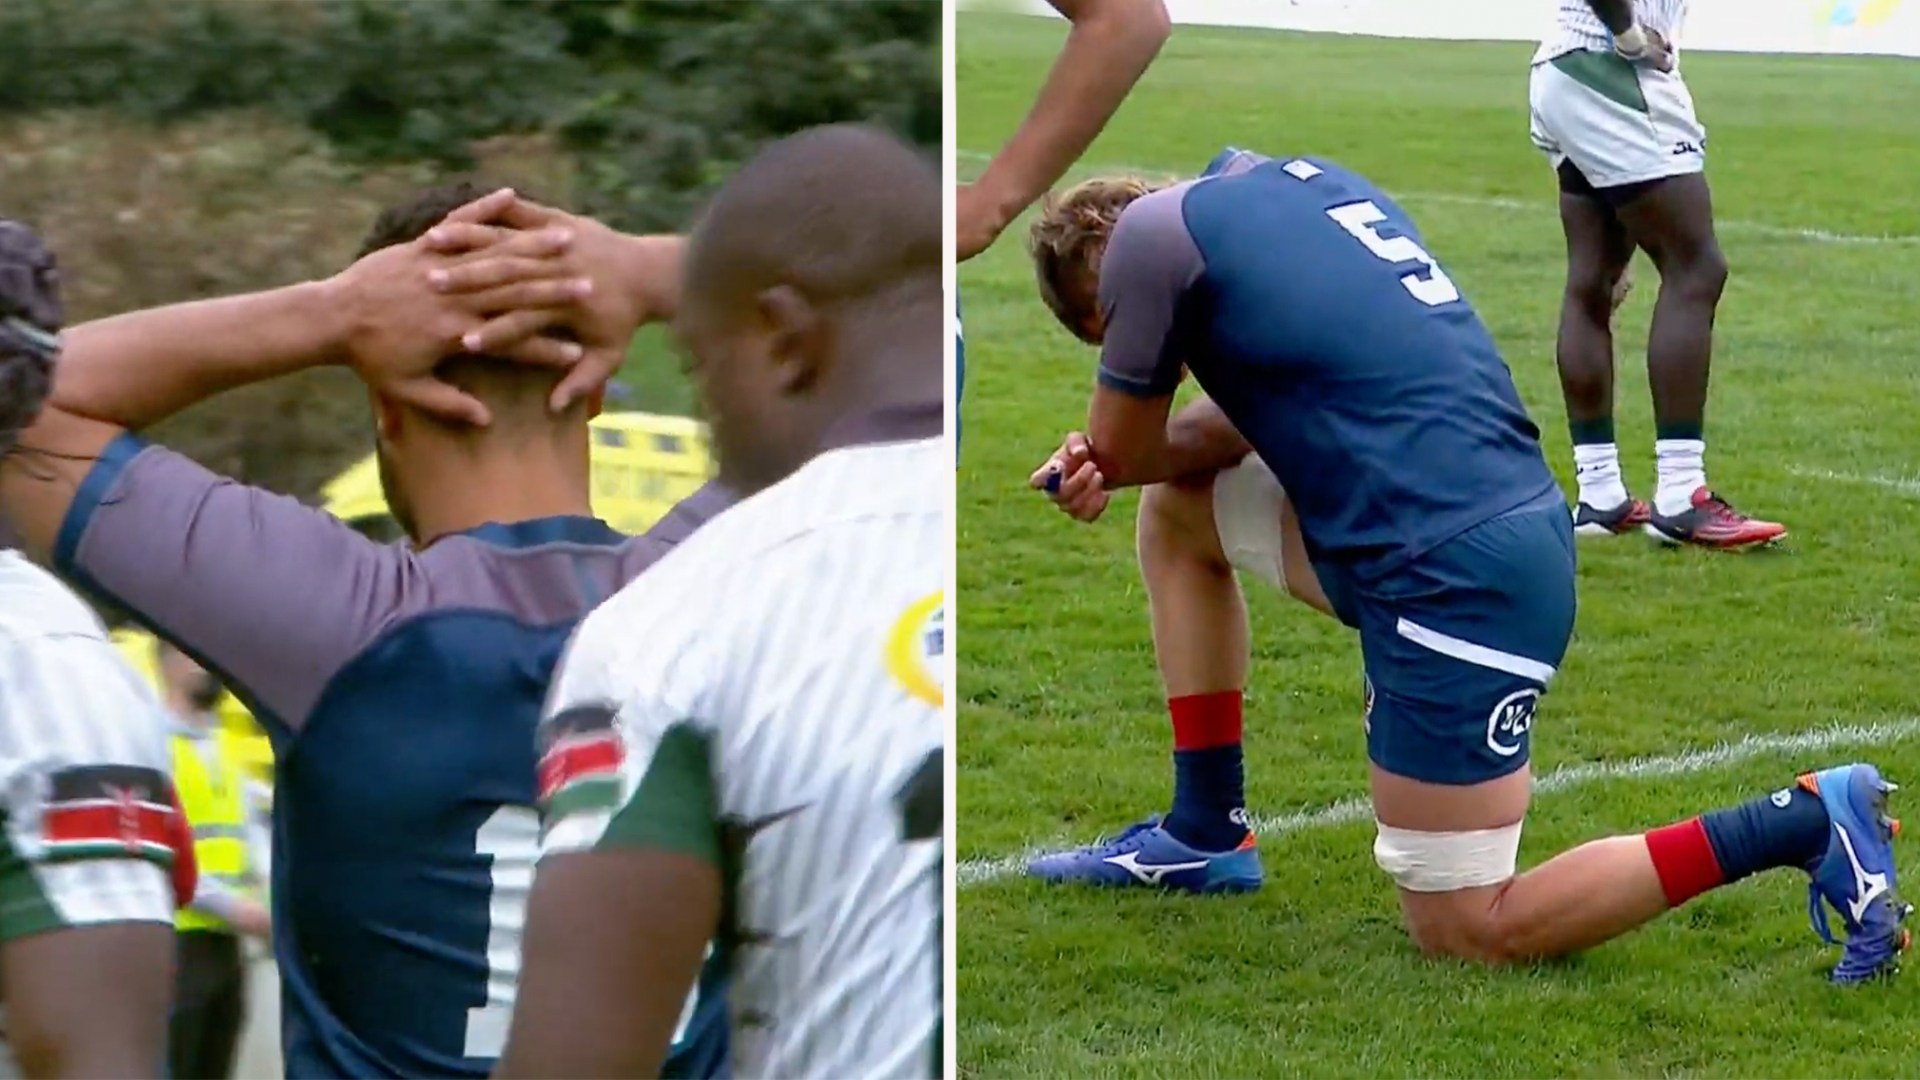 USA rugby players stunned as 7's superstar Perry Baker suffers horror leg break in Madrid